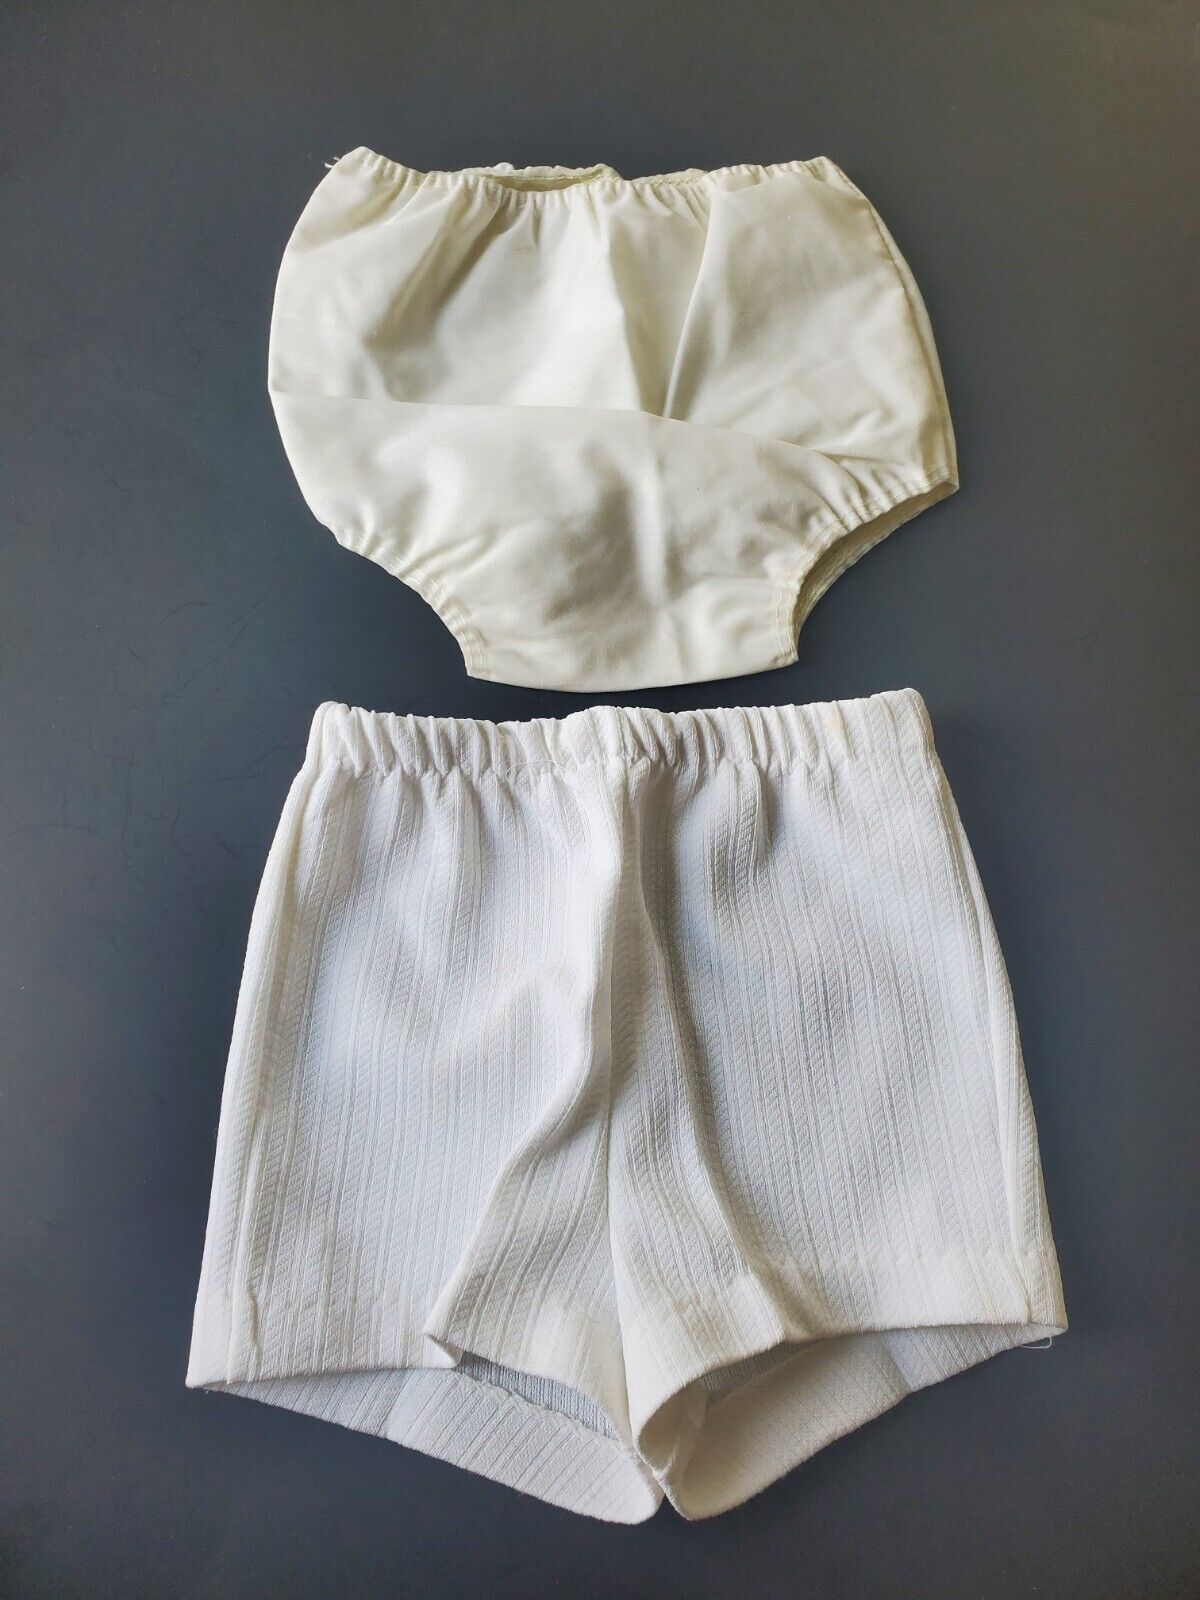 Vintage Diaper Covers 2